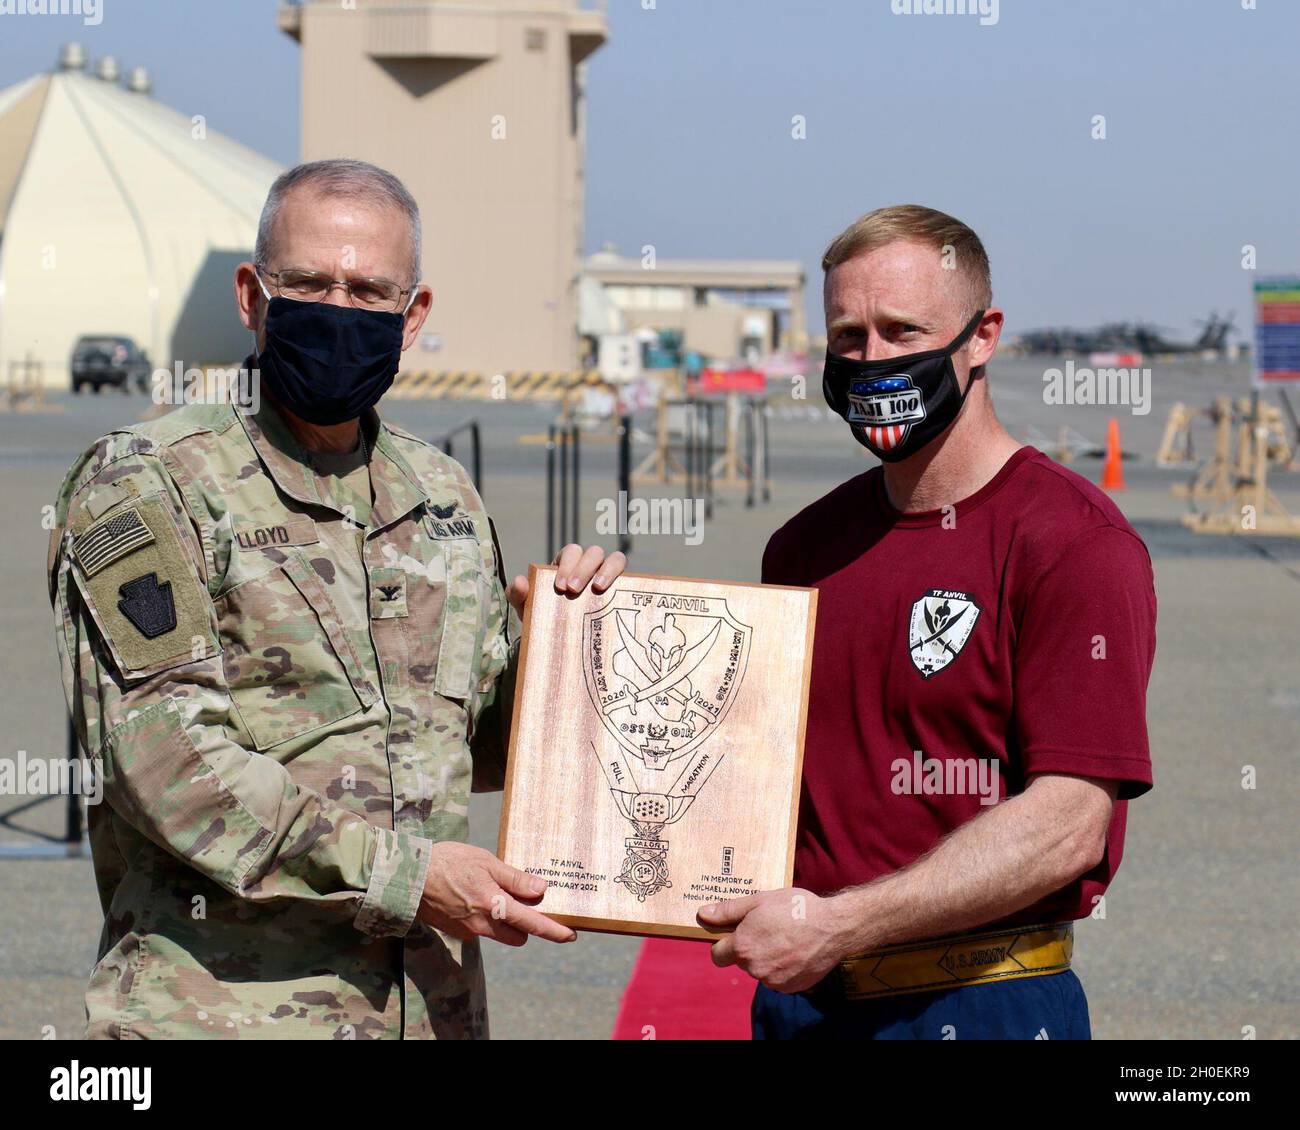 U.S. Army Capt. Sam DeBold, right, support operations officer with Headquarters Support Company, 628th Aviation Support Battalion, 28th Expeditionary Combat Aviation Brigade, receives a handmade plaque from Col. Howard Lloyd, 28th ECAB commander, for being the top finisher in the Task Force Anvil Marathon. About 120 Soldiers raced in memory of Michael J. Novosel, Sr., a native of Etna, Pennsylvania, who served for over 40 years as an Army aviator and received the Medal of Honor for rescuing 29 Soldiers during the Vietnam War. Stock Photo